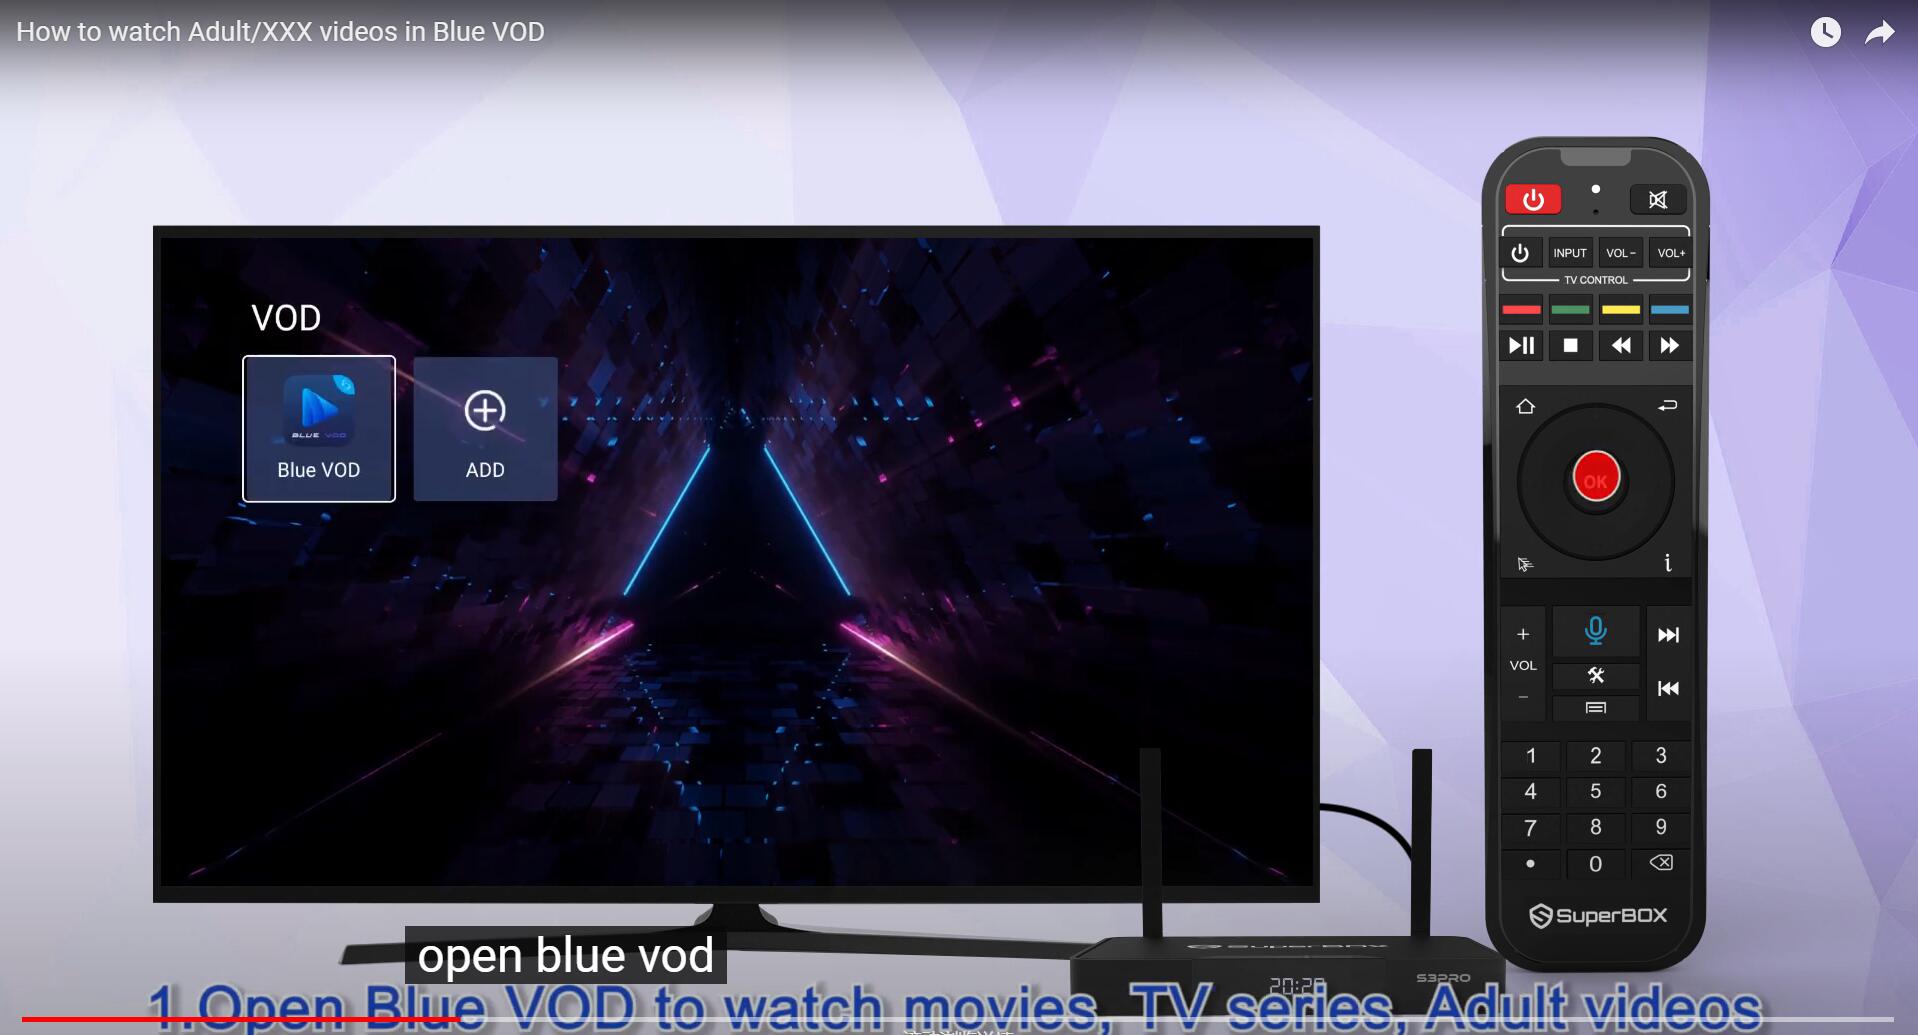 How to watch Adult/XXX/18+ videos in SuperBox Blue VOD?